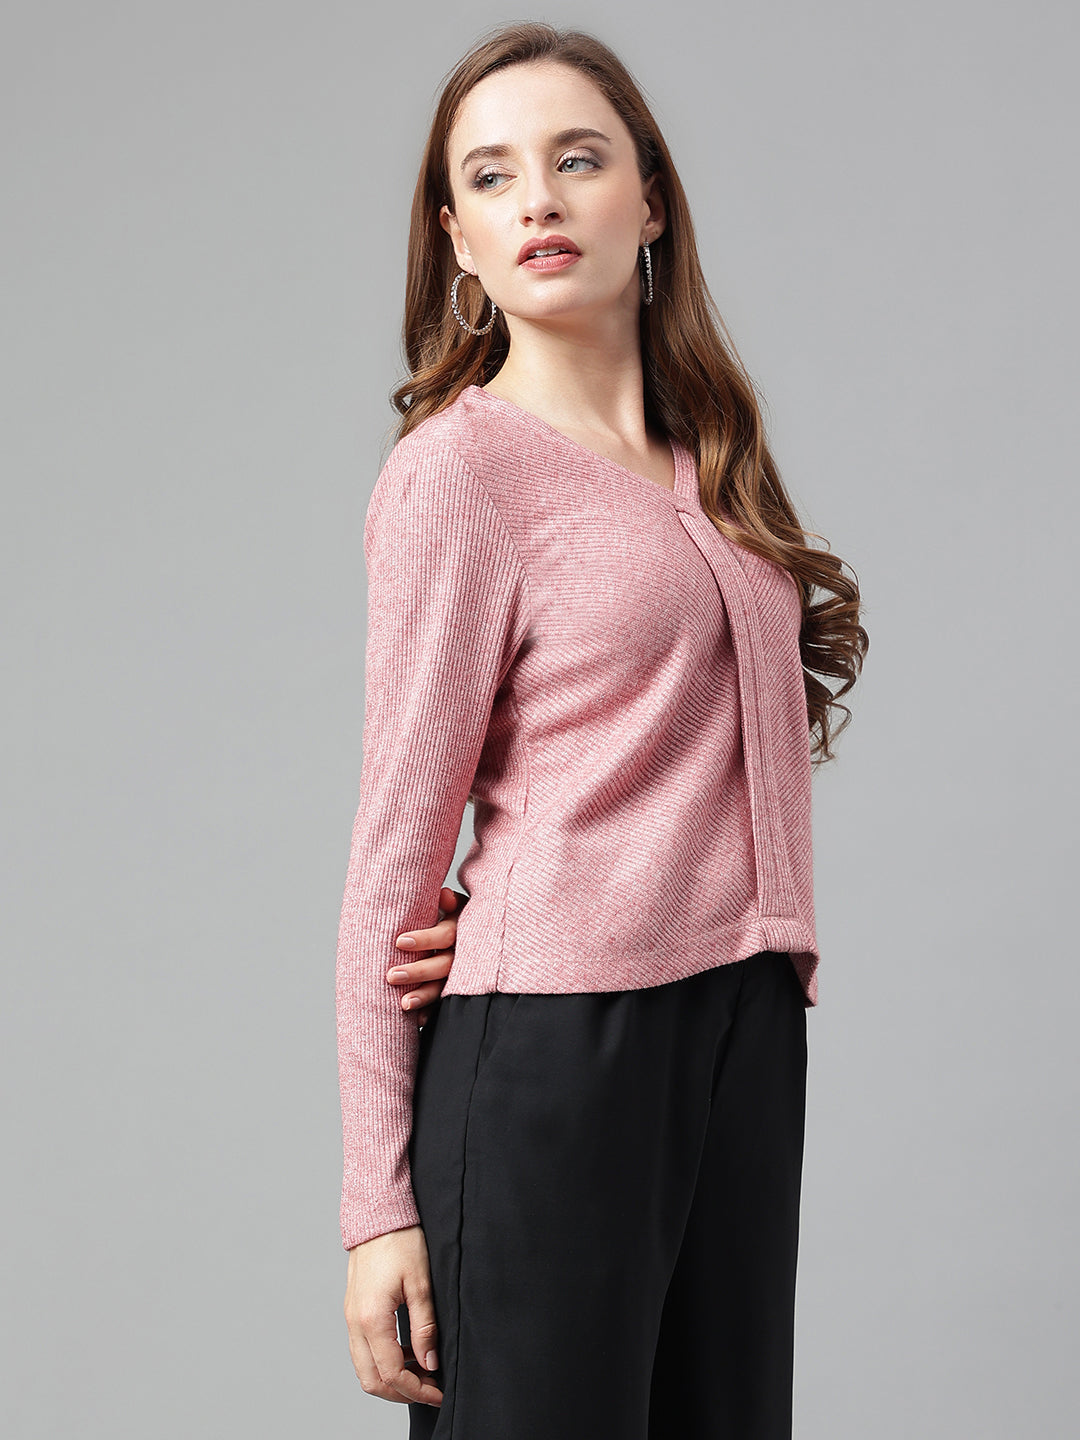 Rose Full Sleeve Solid Rayon Knit Top